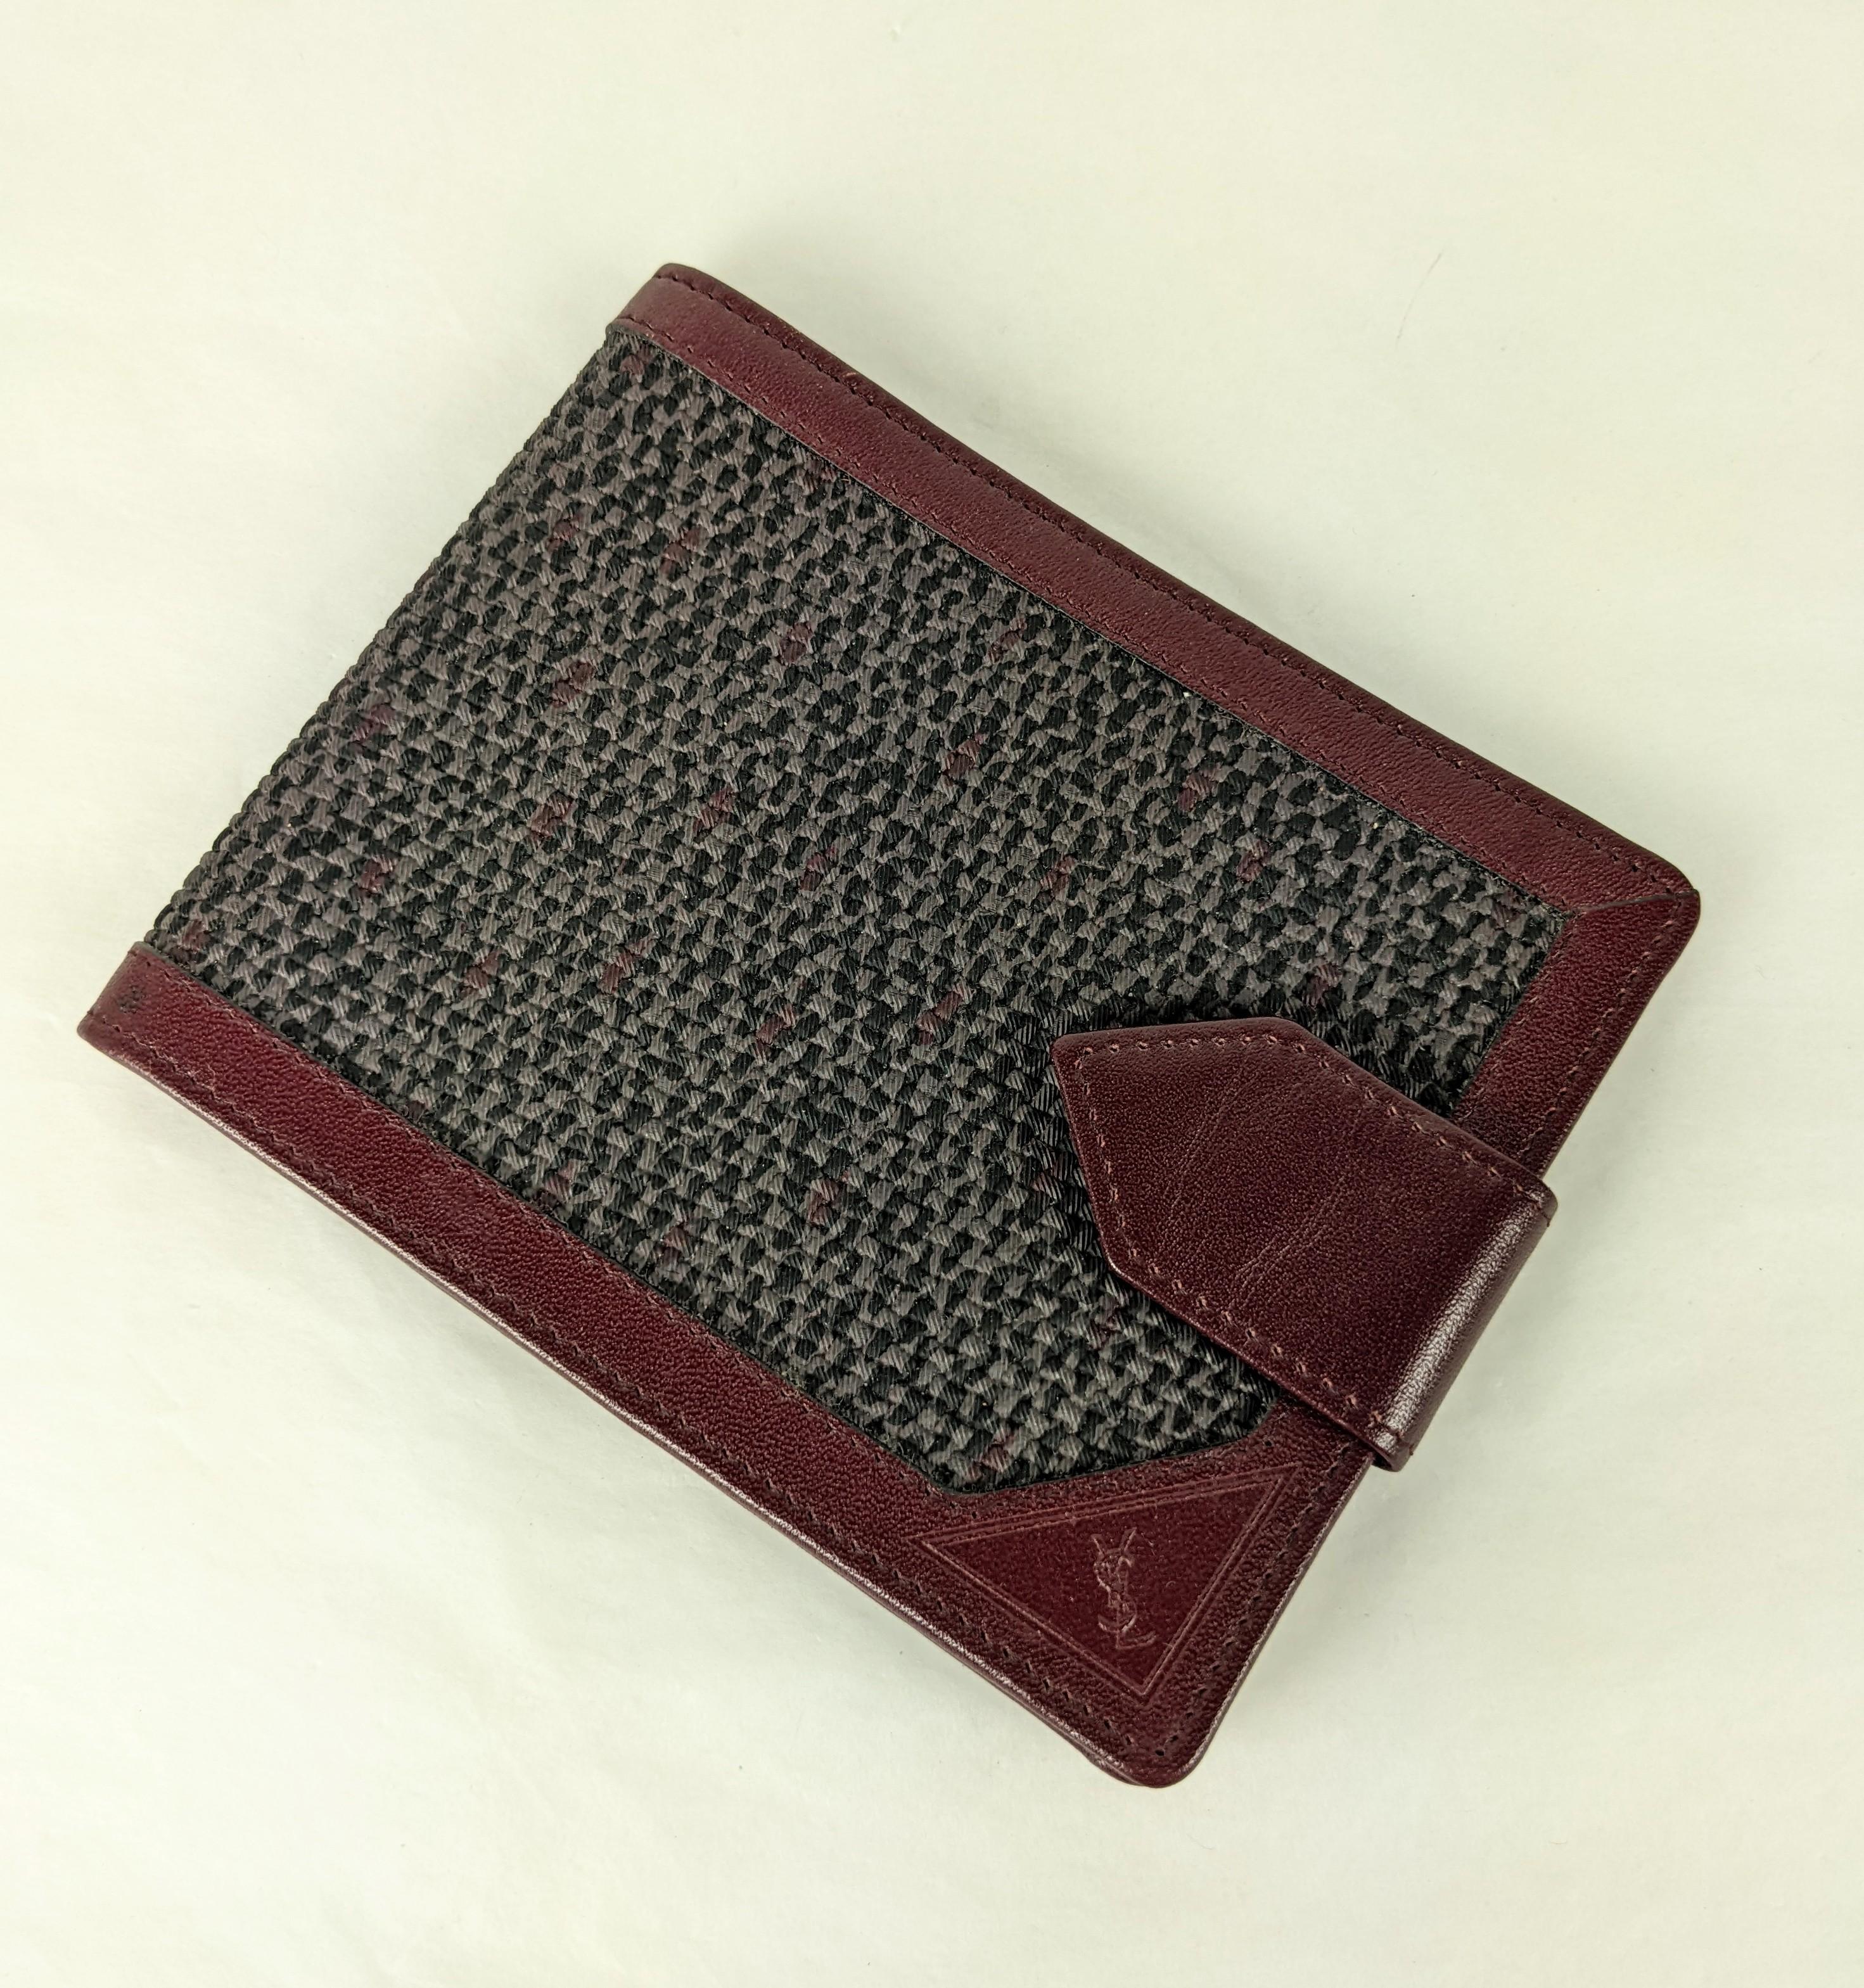 Yves Saint Laurent Faux Tweed Leather Fold designed as a check book fold. Slightly larger in scale than a normal wallet. Burgundy leather with faux tweed grey leather cover, snap tag and embossed YSL logo. 
Closed 5